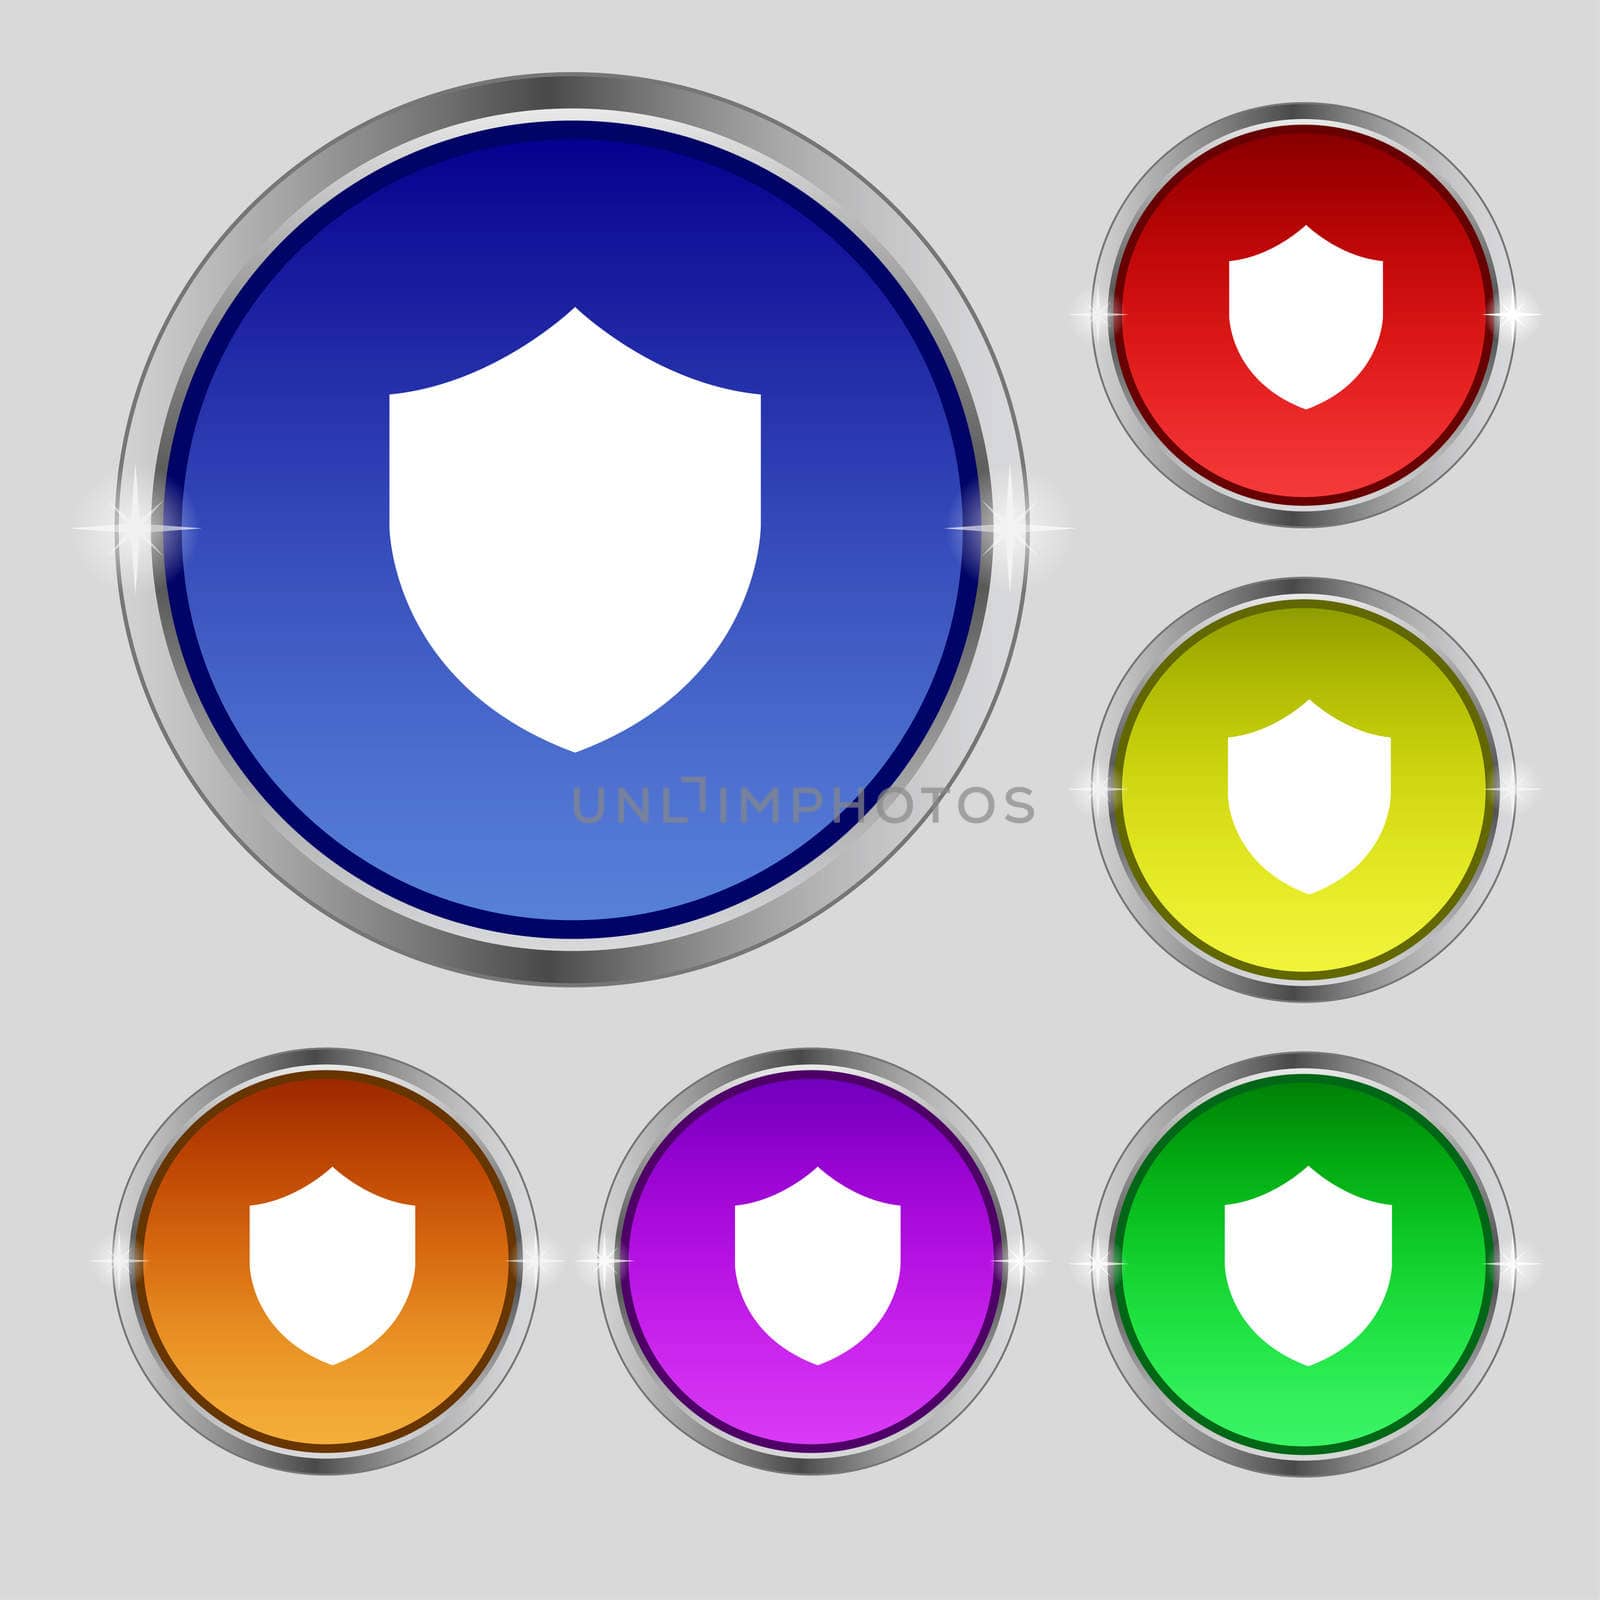 Shield, Protection icon sign. Round symbol on bright colourful buttons. illustration